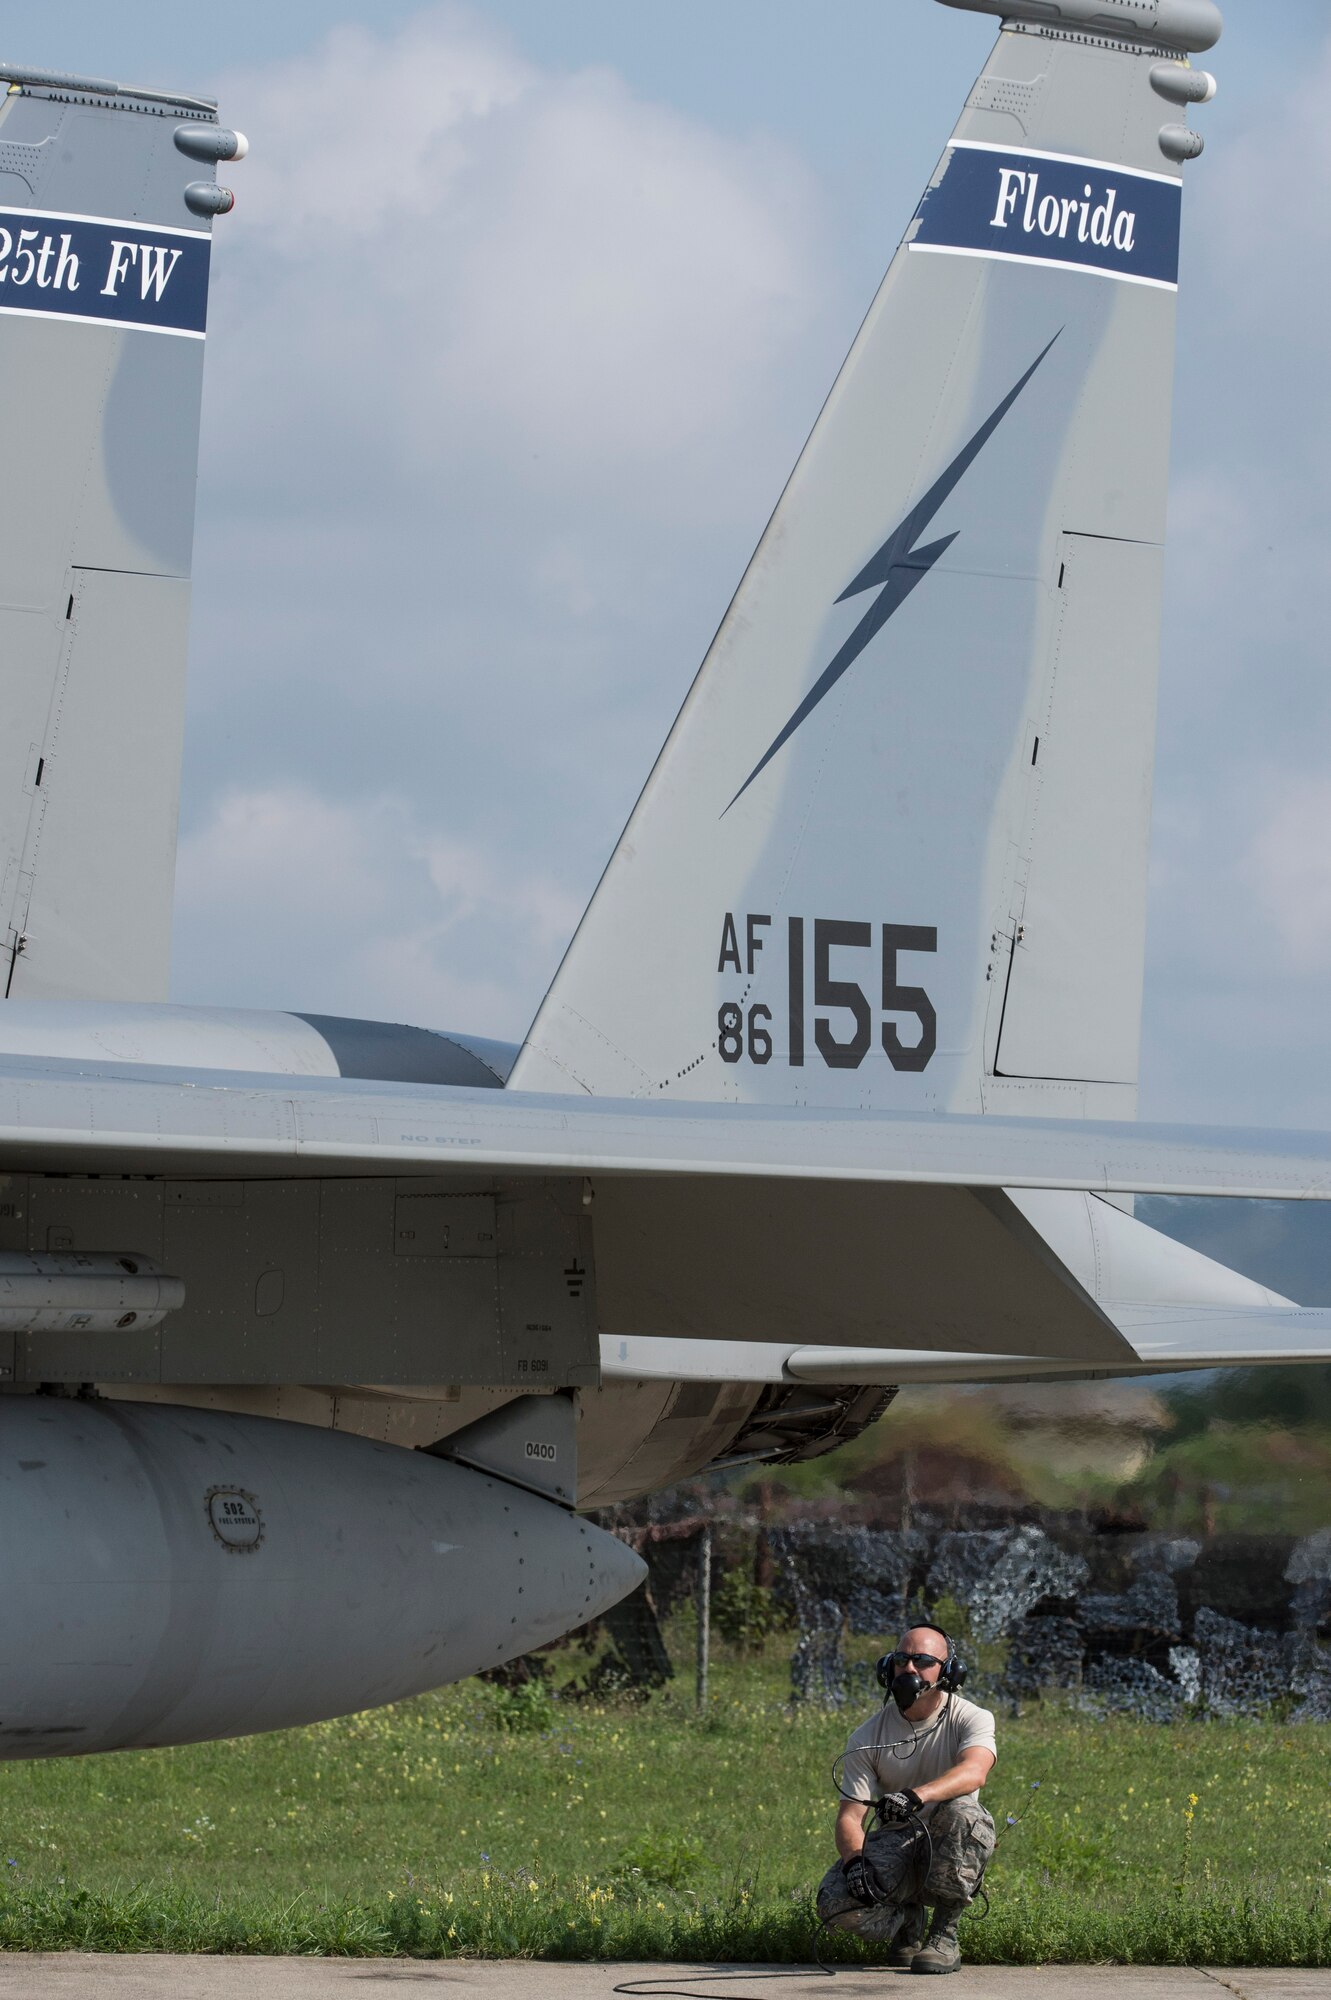 A crew chief from the 123rd Expeditionary Fighter Squadron, 142nd Fighter Wing, Oregon Air National Guard, performs pre-flight checks on an F-15C Eagle fighter aircraft during a theater security package deployment Sept. 25, 2015, at Campia Turzii, Romania. The U.S. Air Force’s forward presence in Europe allows cooperation among NATO allies and partners to develop and improve ready air forces capable of maintaining regional security. (U.S. Air Force photo by Staff Sgt. Christopher Ruano/Released)